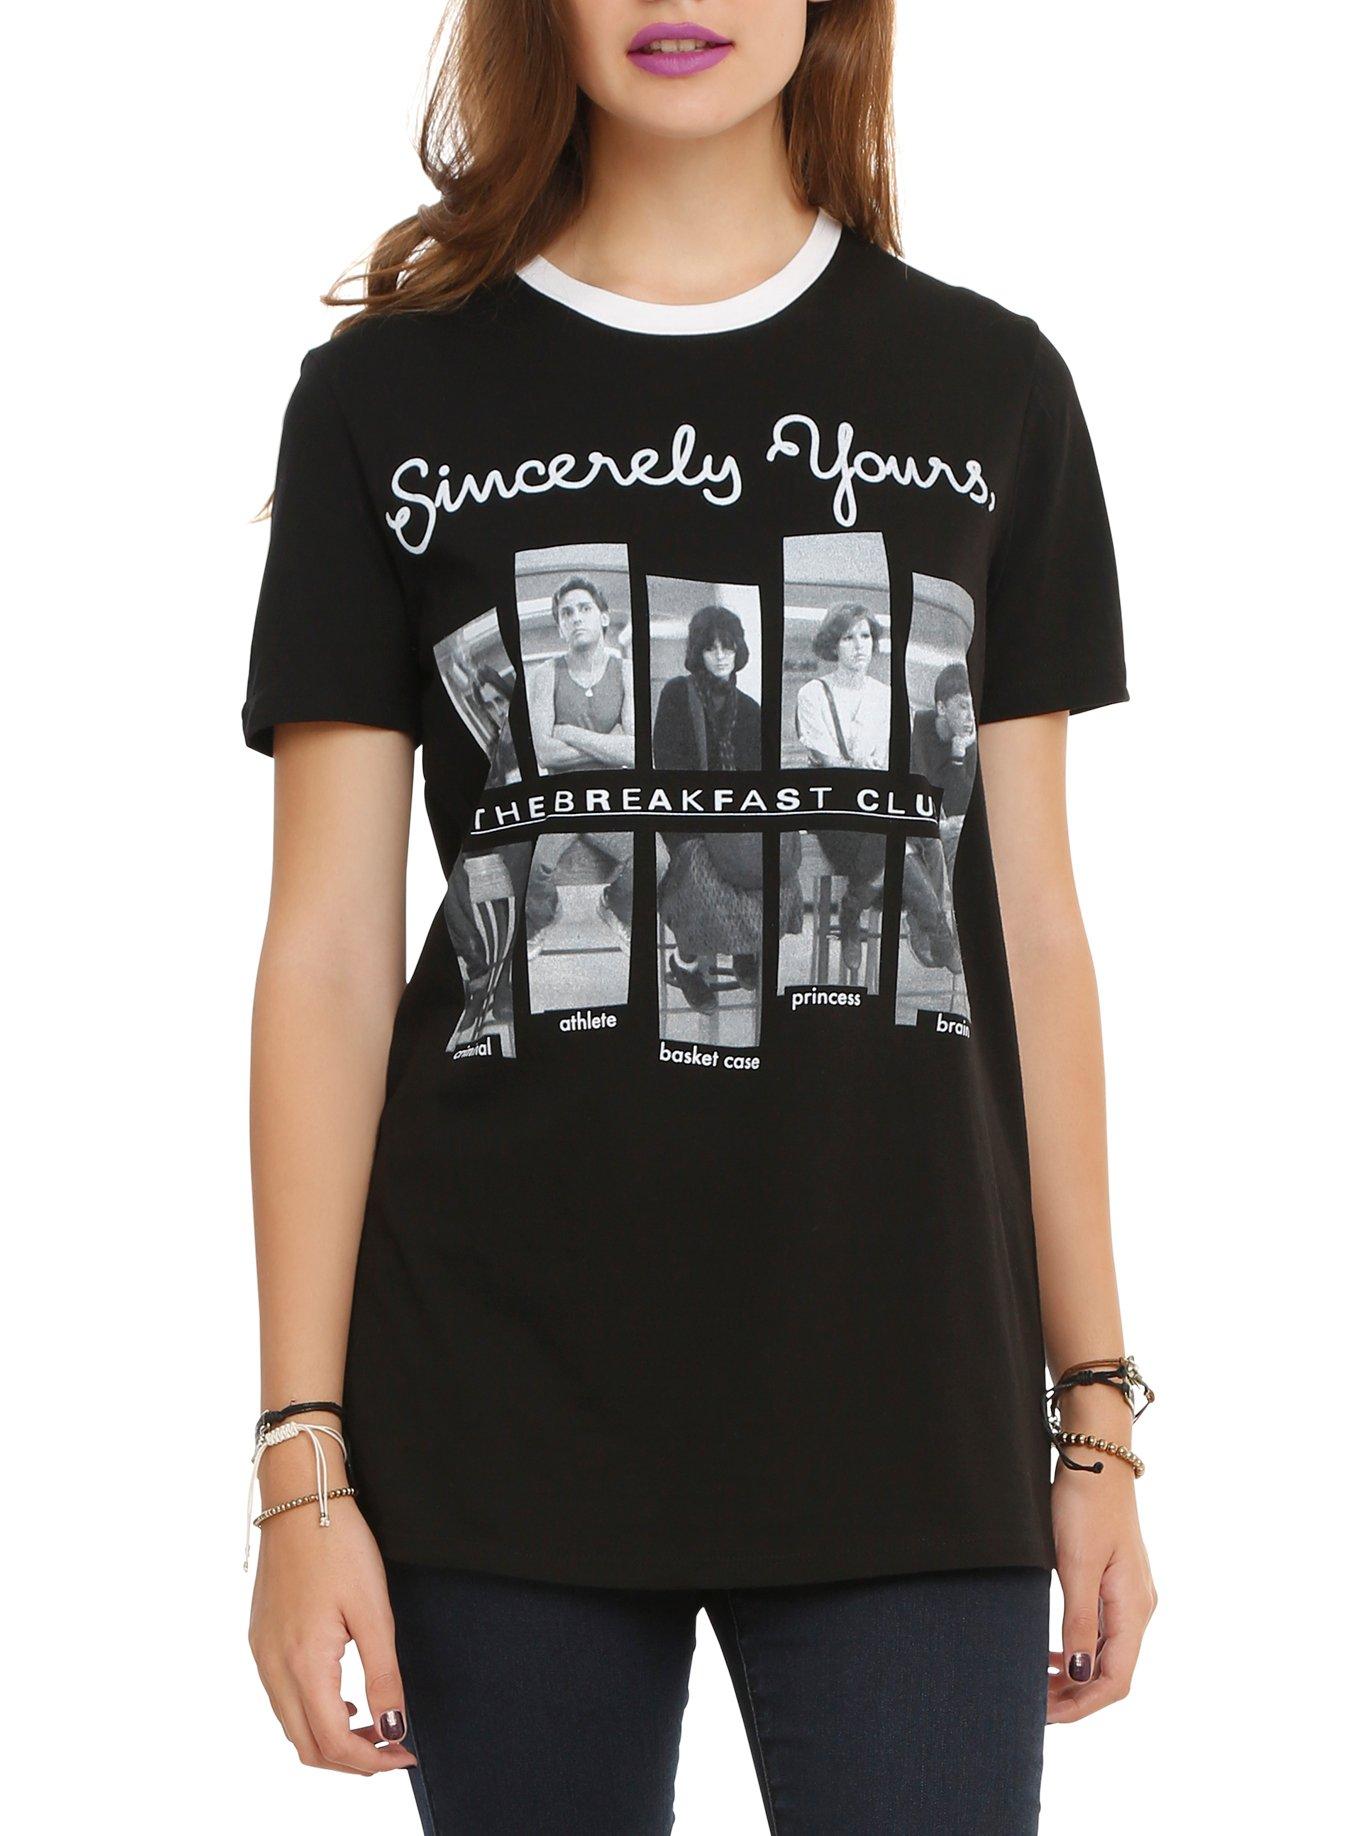 The Breakfast Club Sincerely Yours Girls T-Shirt, BLACK, hi-res